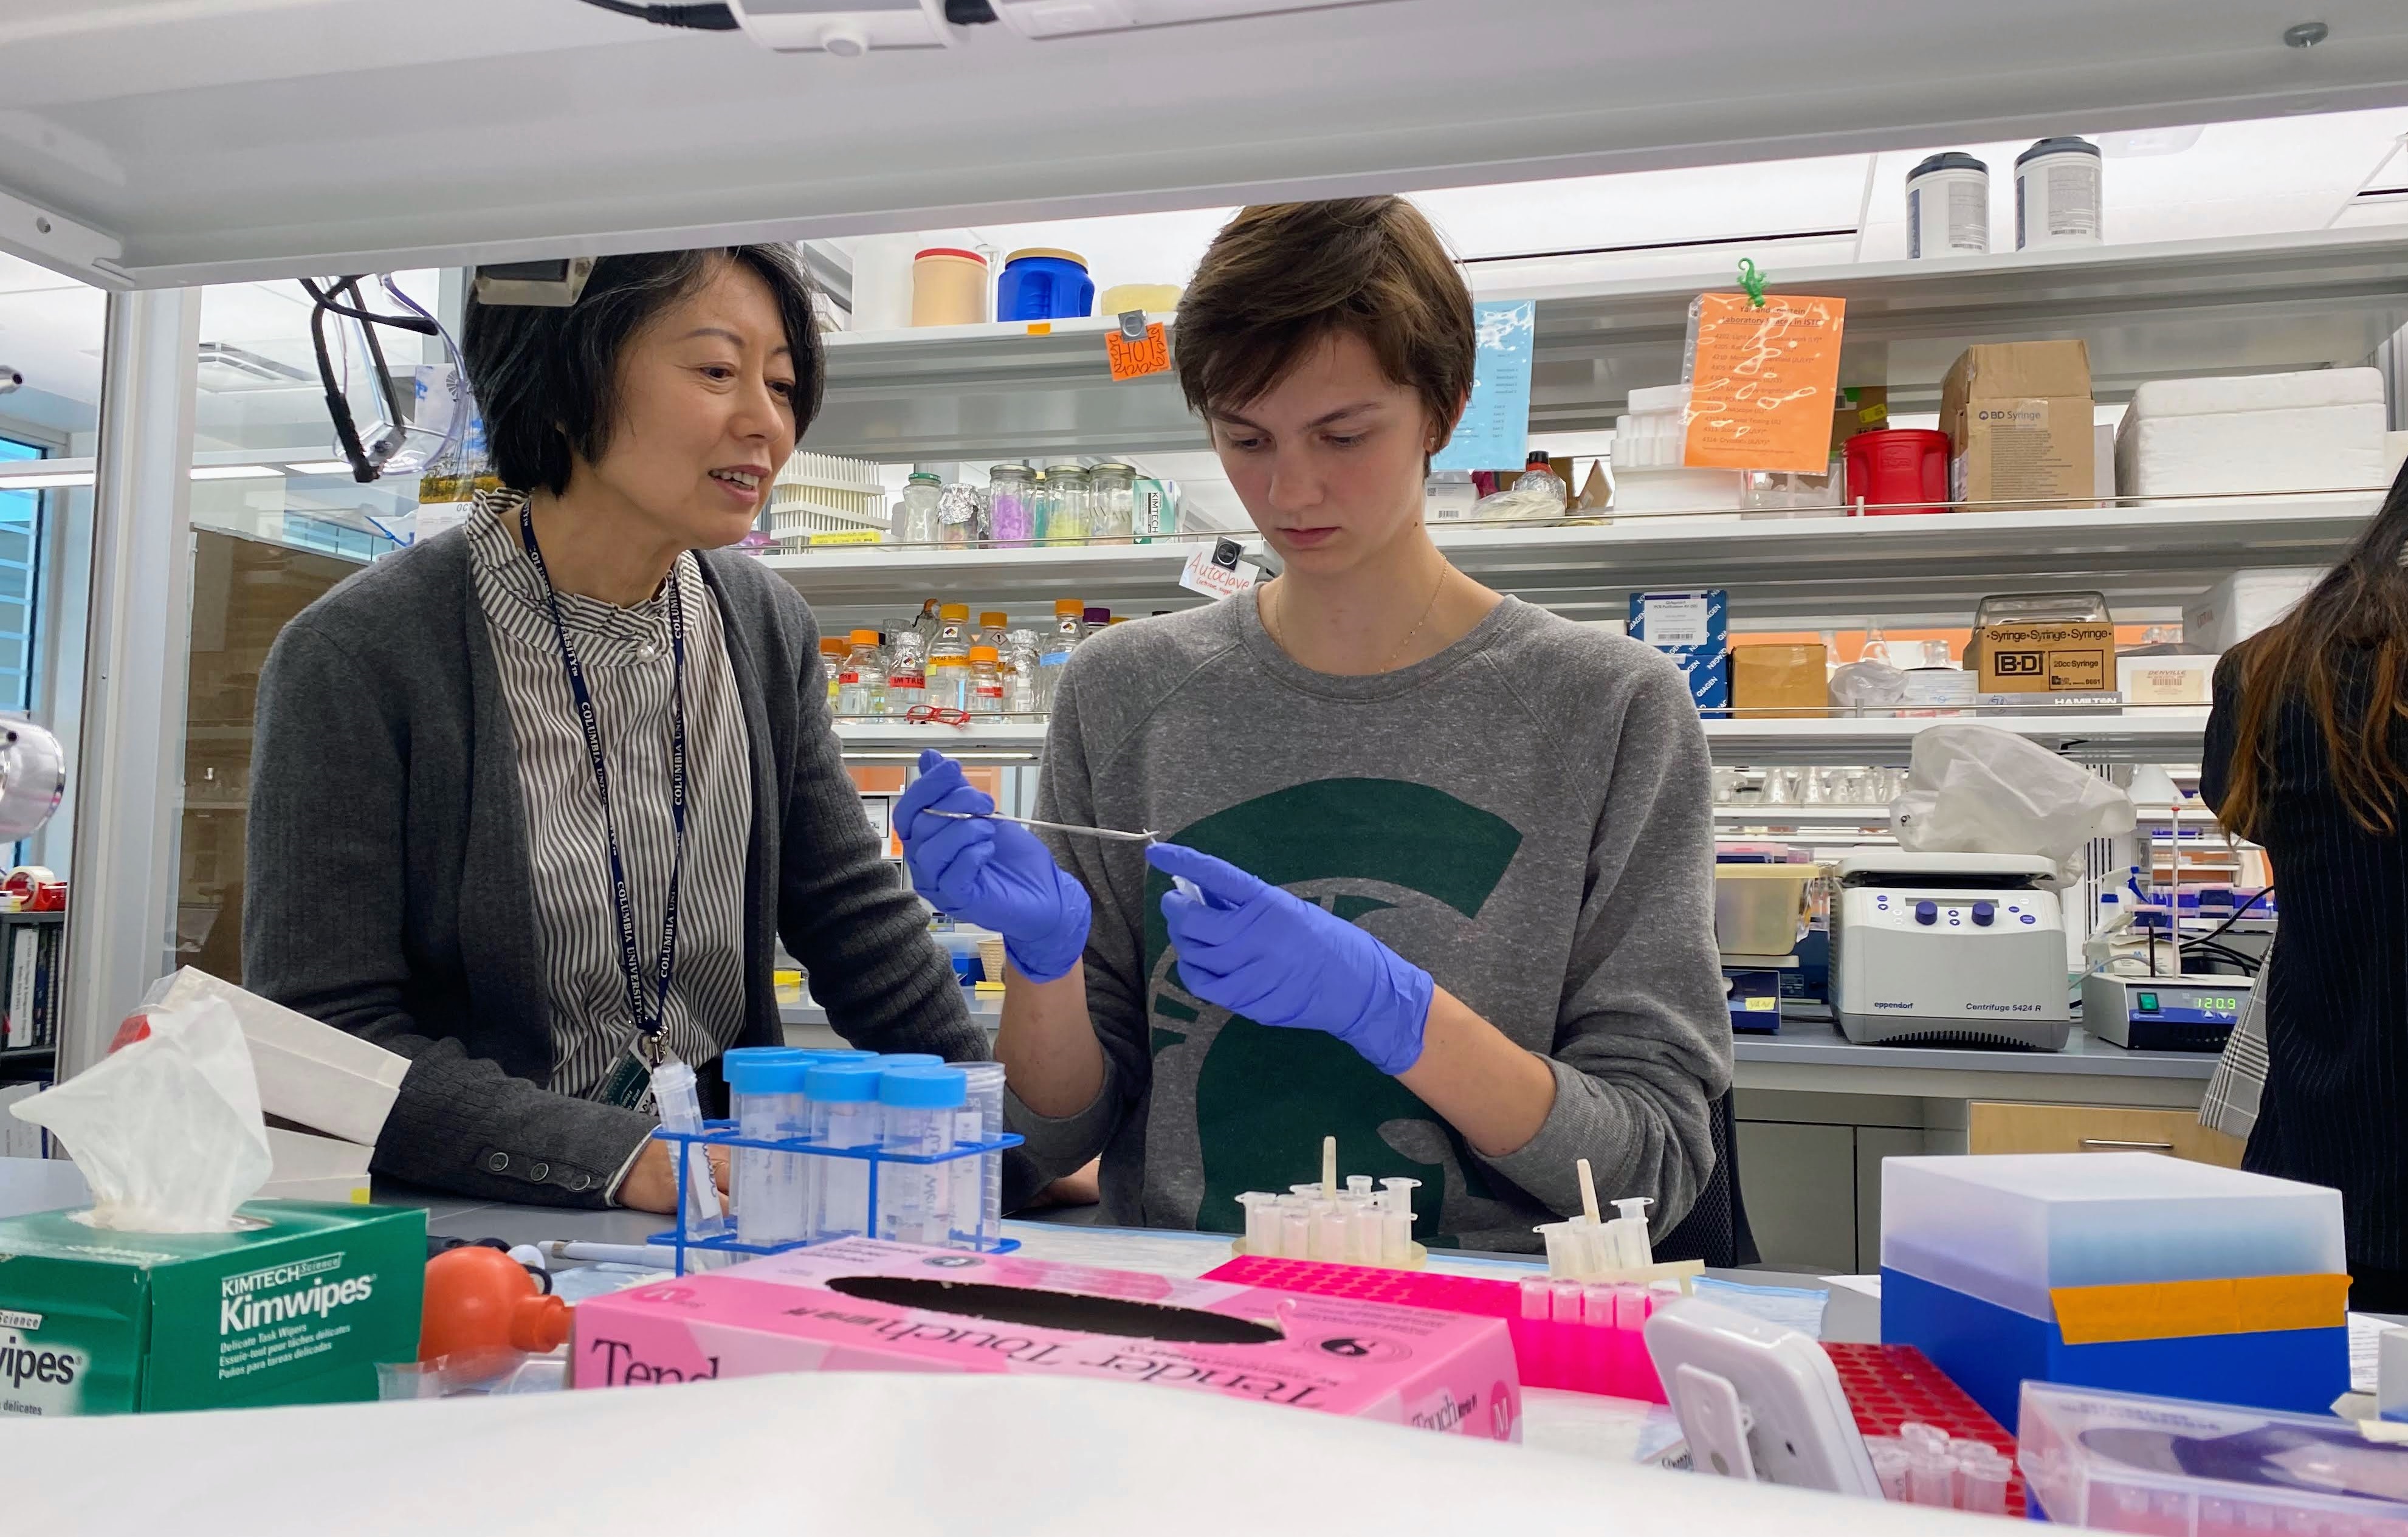 Dr. Yan and student work together in a lab.